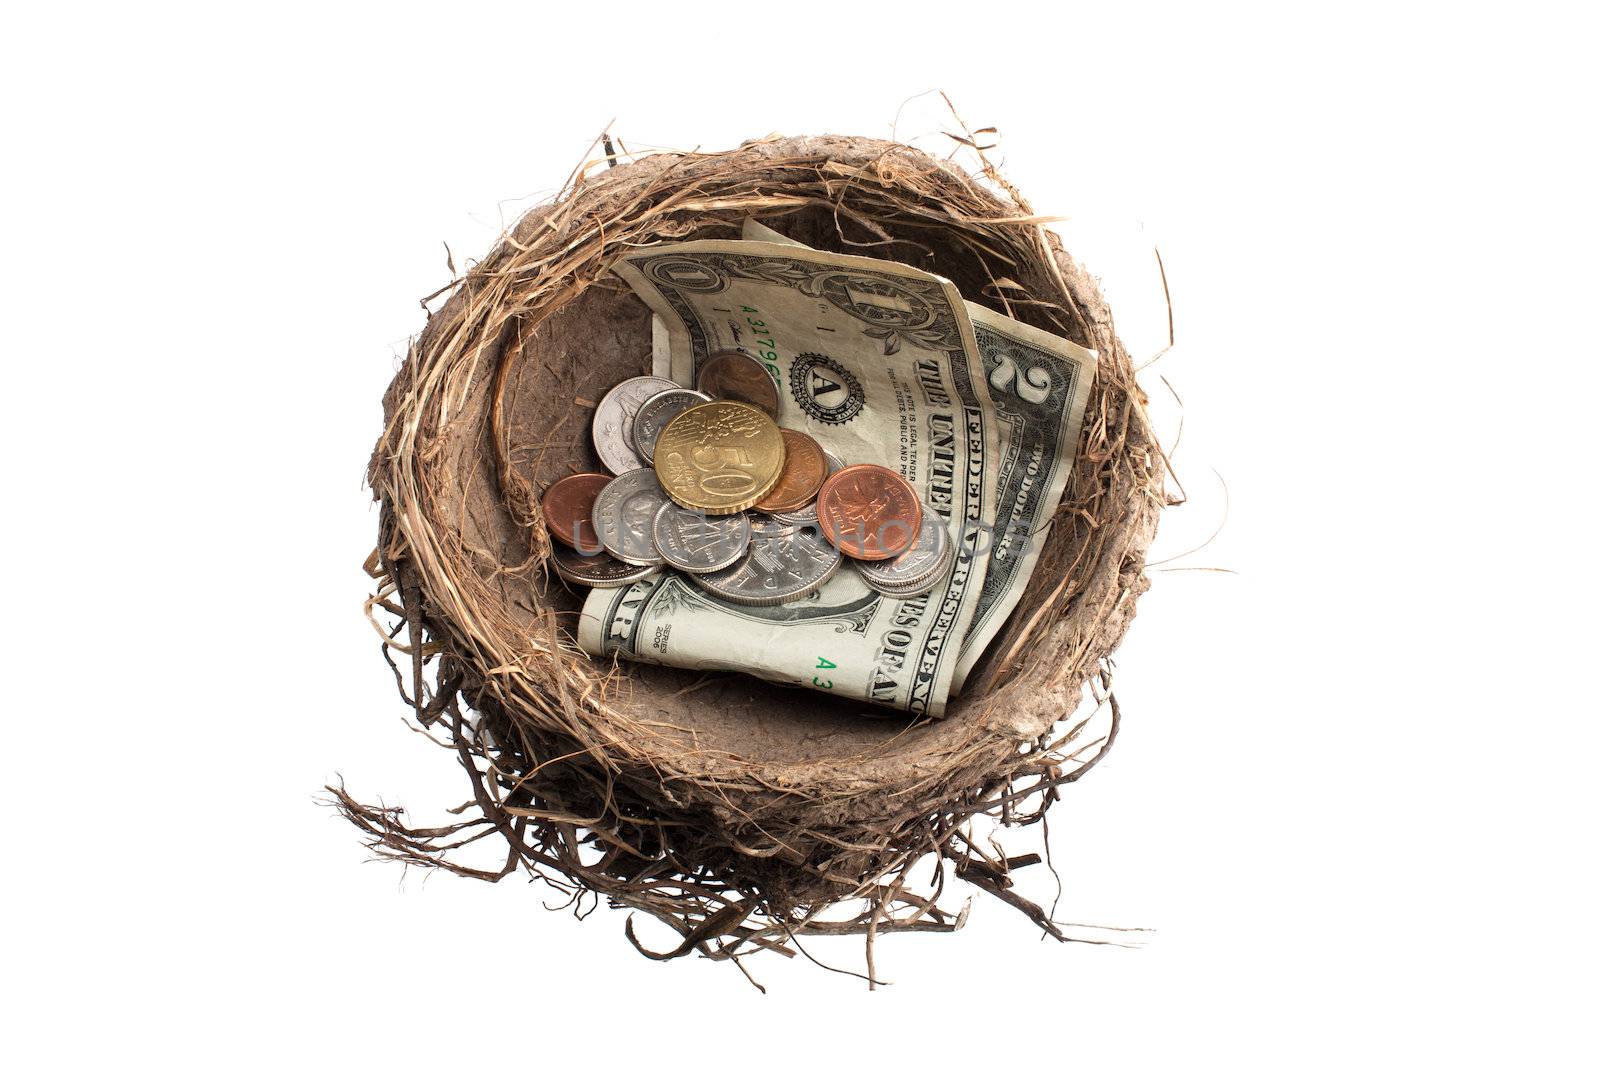 Close-up shot of bird's nest with paper currency and metal coins over white background.